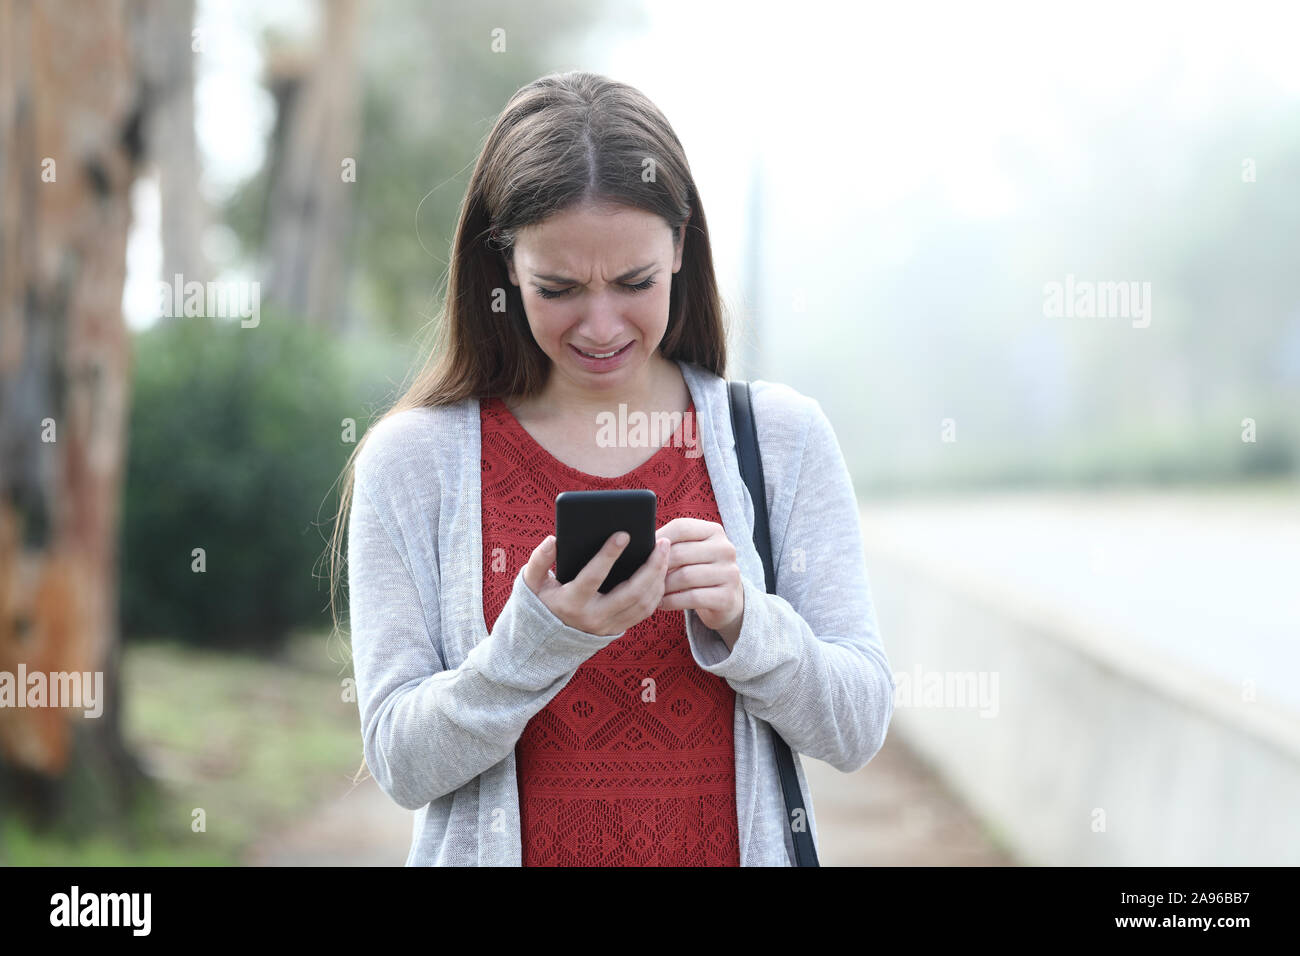 Front view portrait of an sad woman crying walking using mobile phone in a park Stock Photo